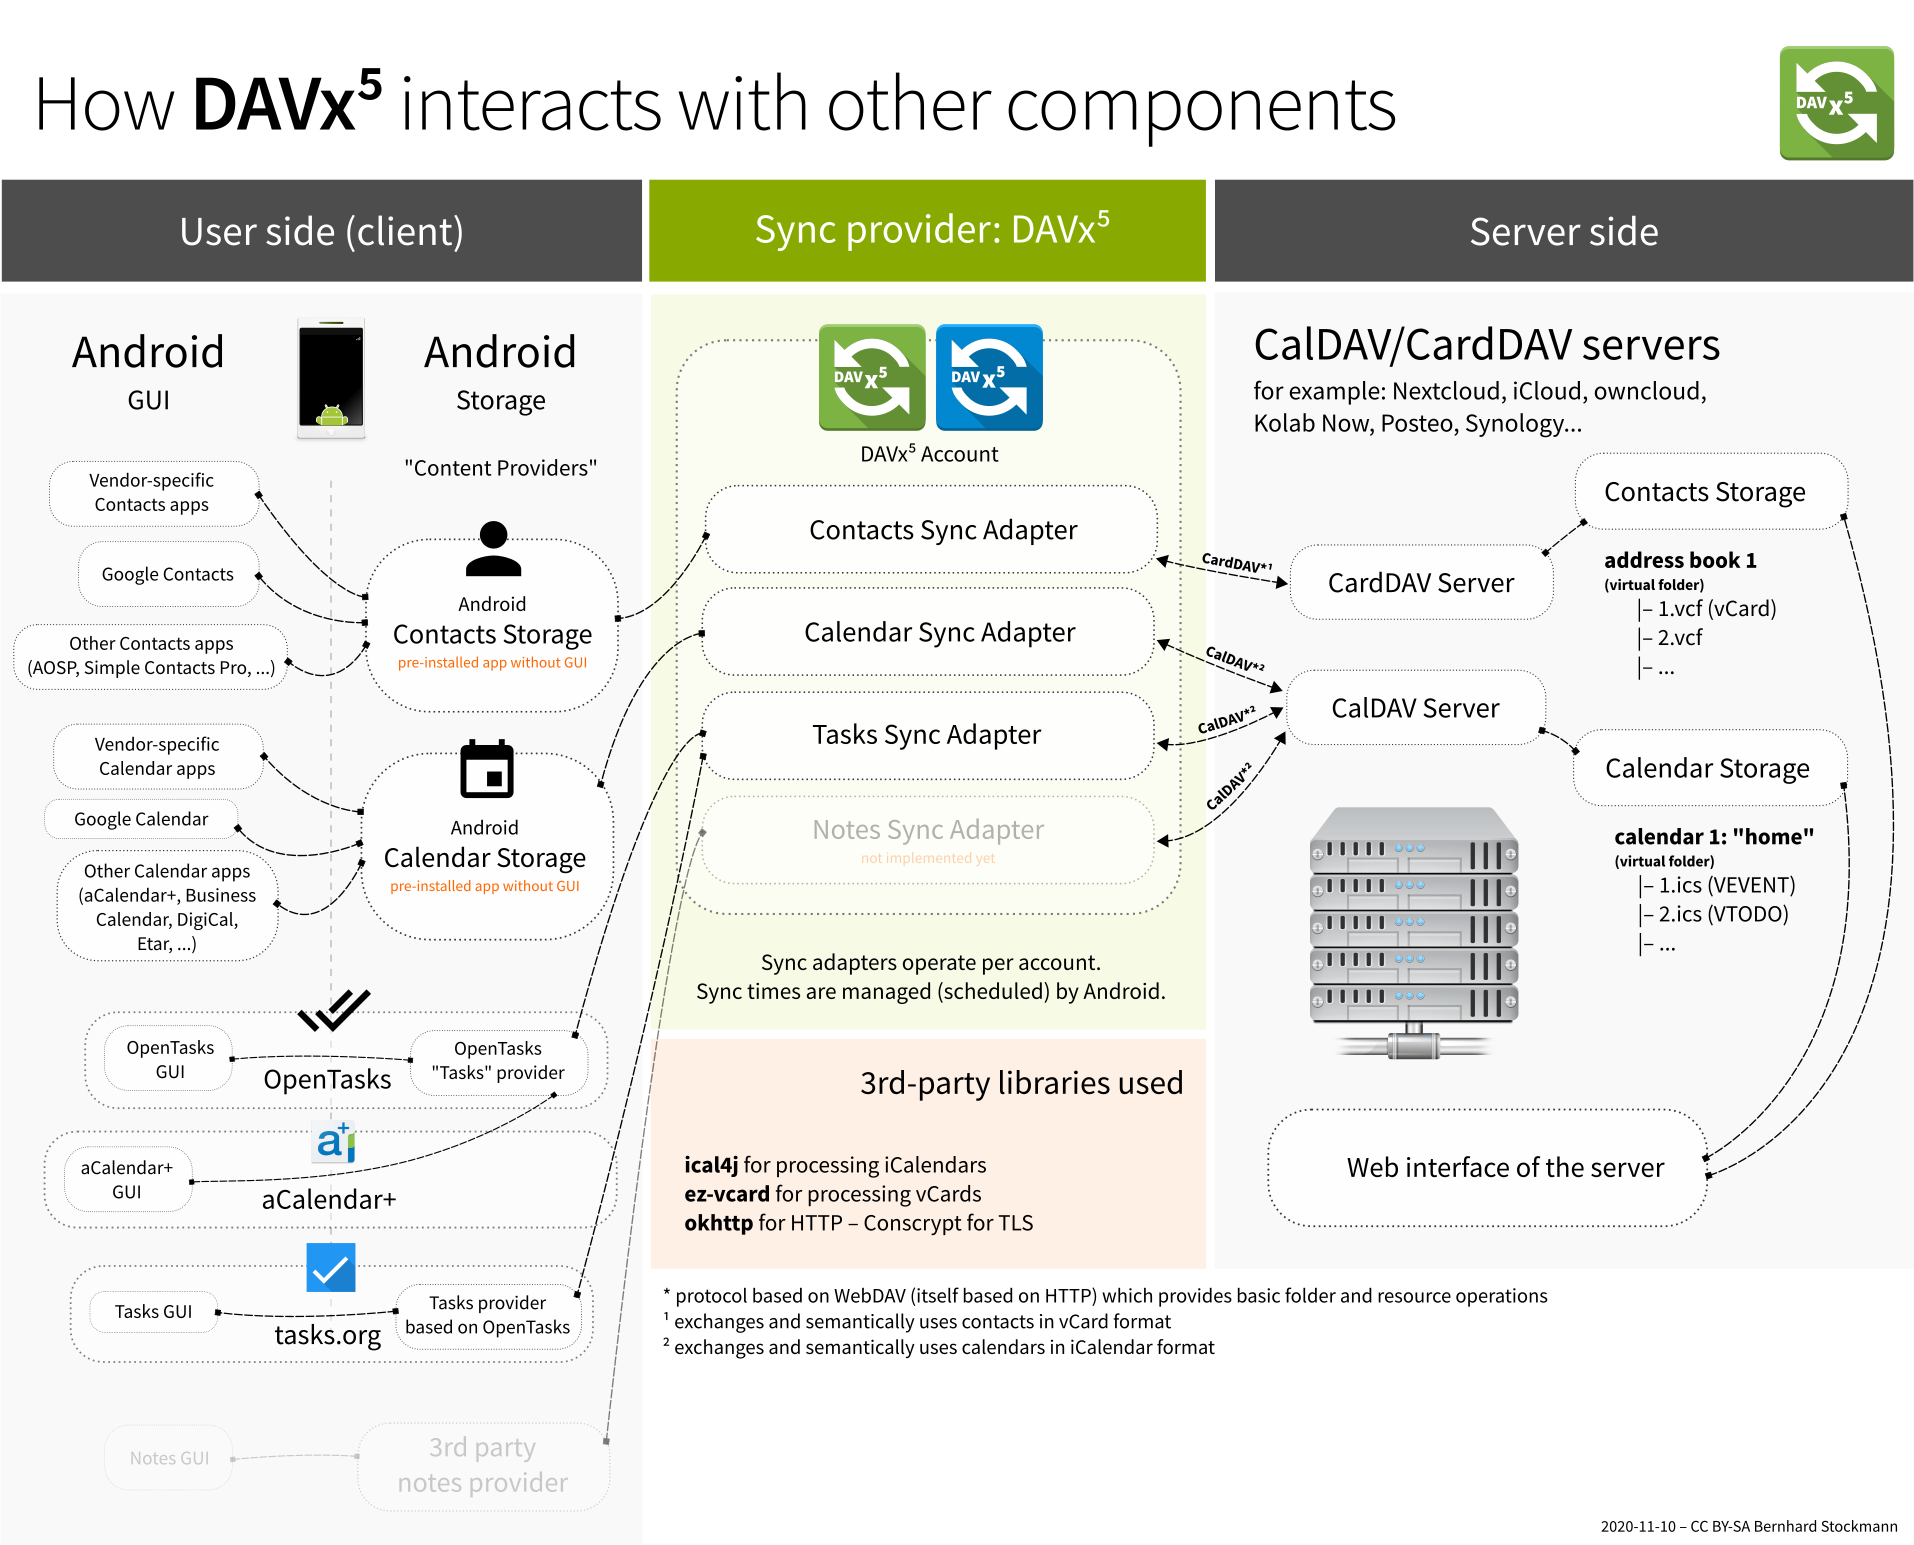 How DAVx⁵ interacts with other components